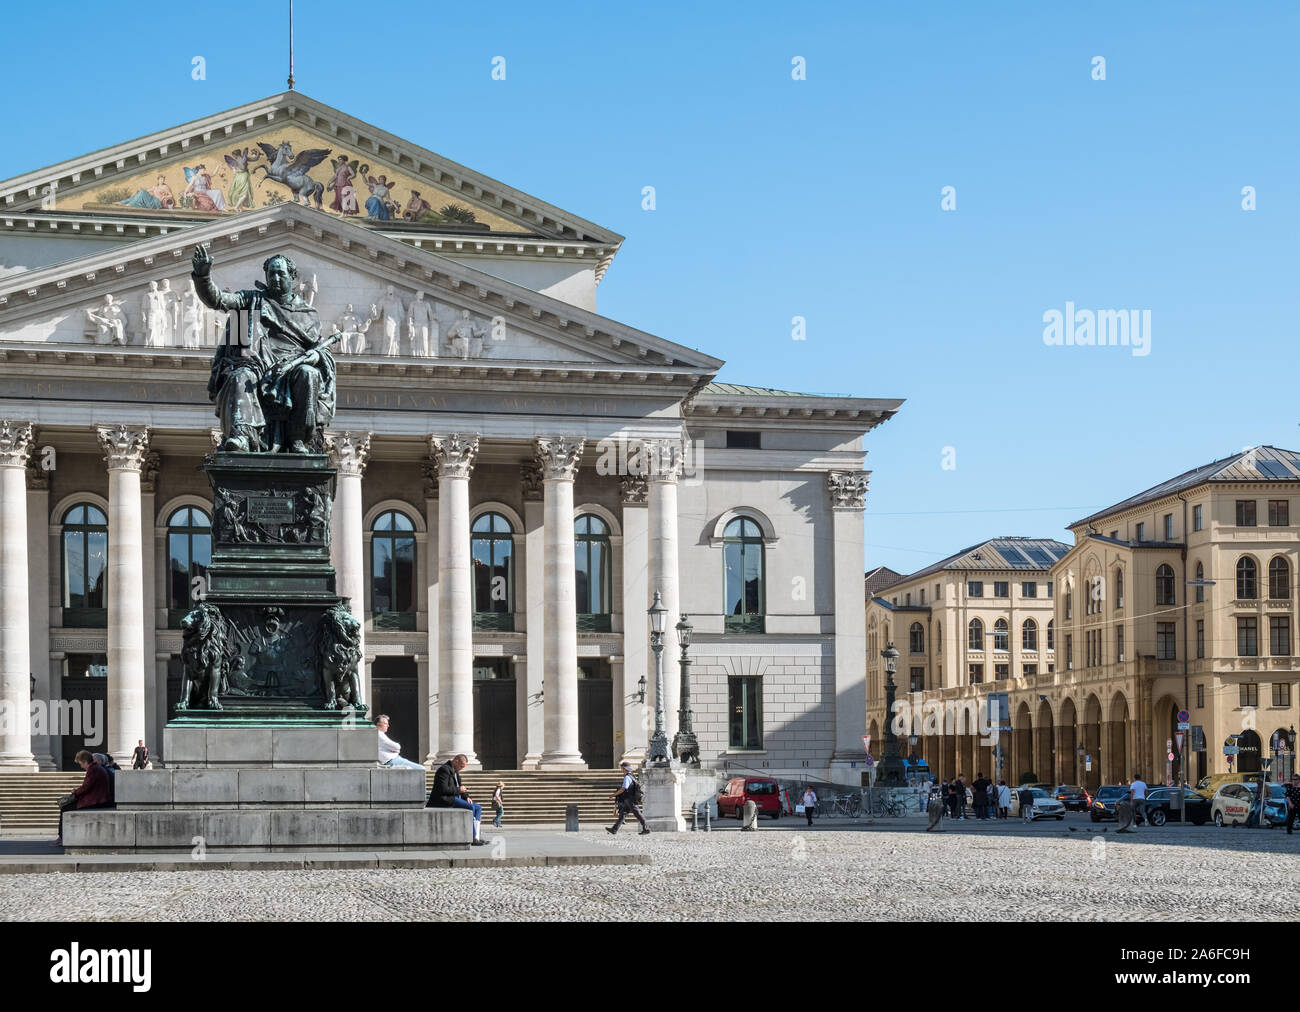 Monument to King Maximilian I Joseph von Bayern, located in Max Joseph Platz, in front of the National Theatre building, Altstadt, Munich, Germany Stock Photo